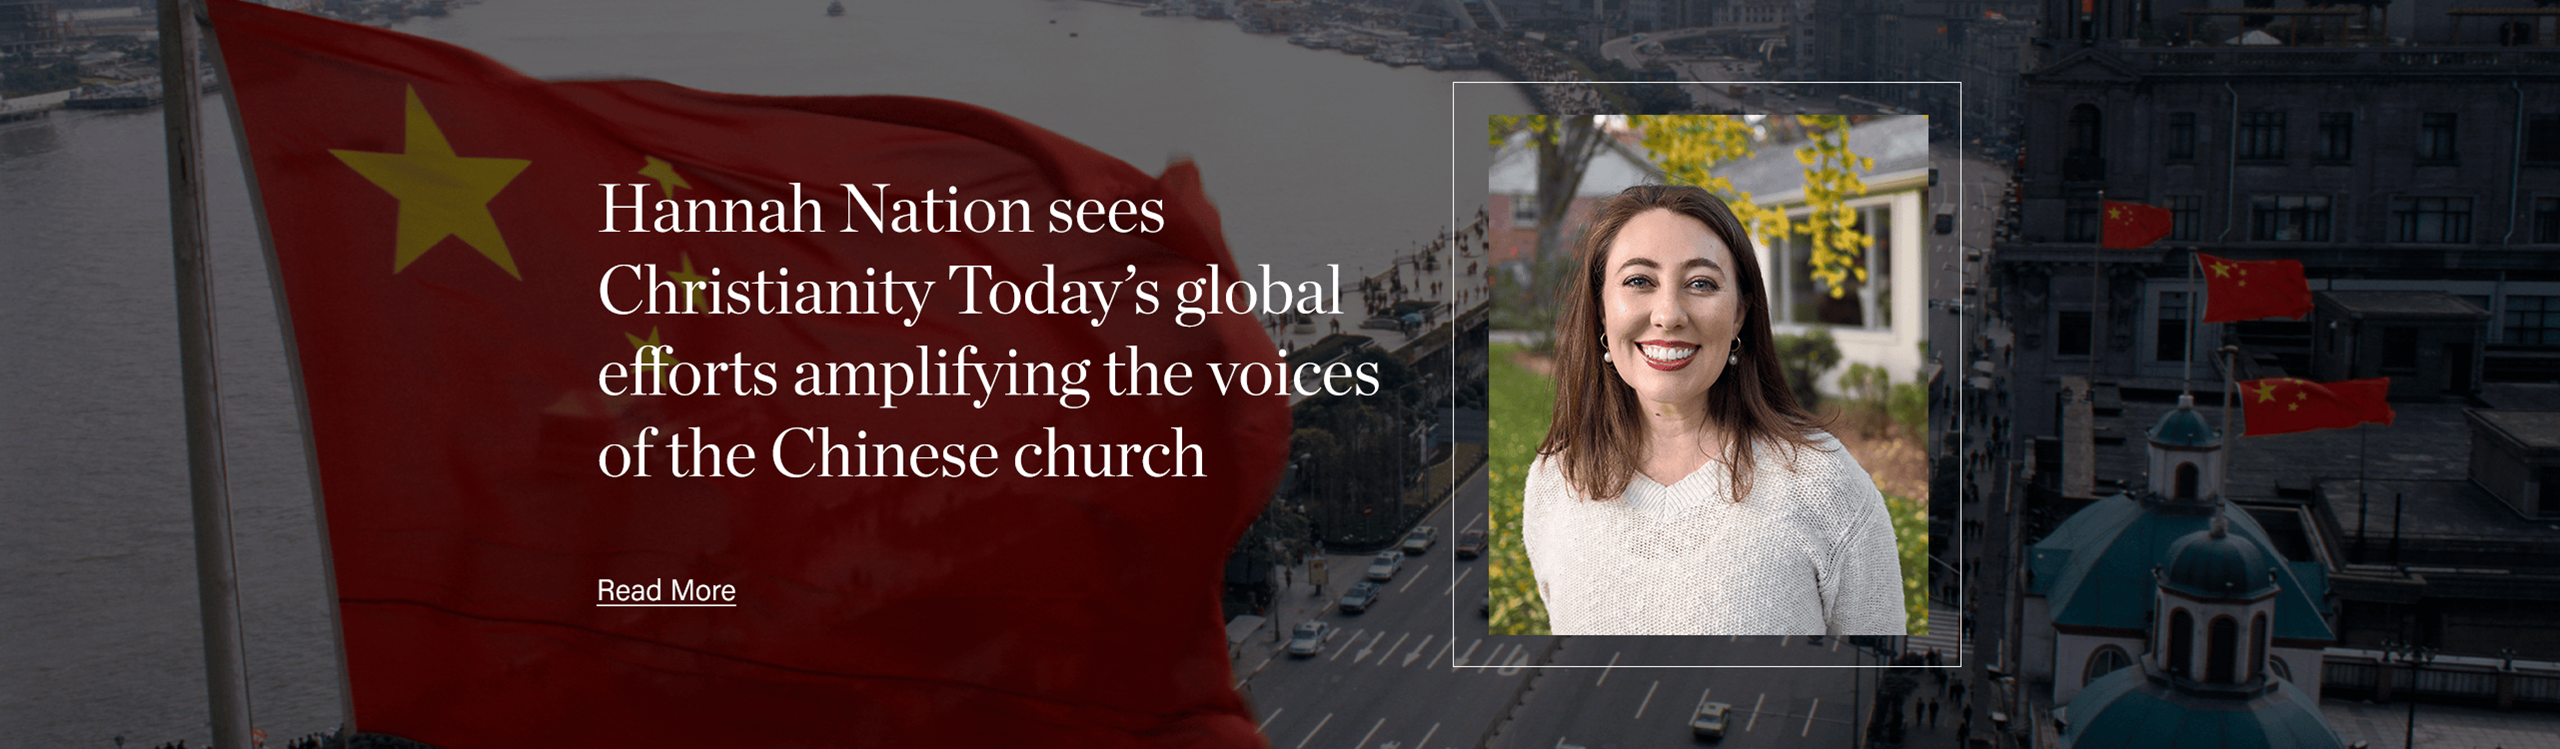 Building Bridges Among the Persecuted Church: Hannah Nation sees Christianity Today’s global efforts amplifying the voices of the Chinese church.